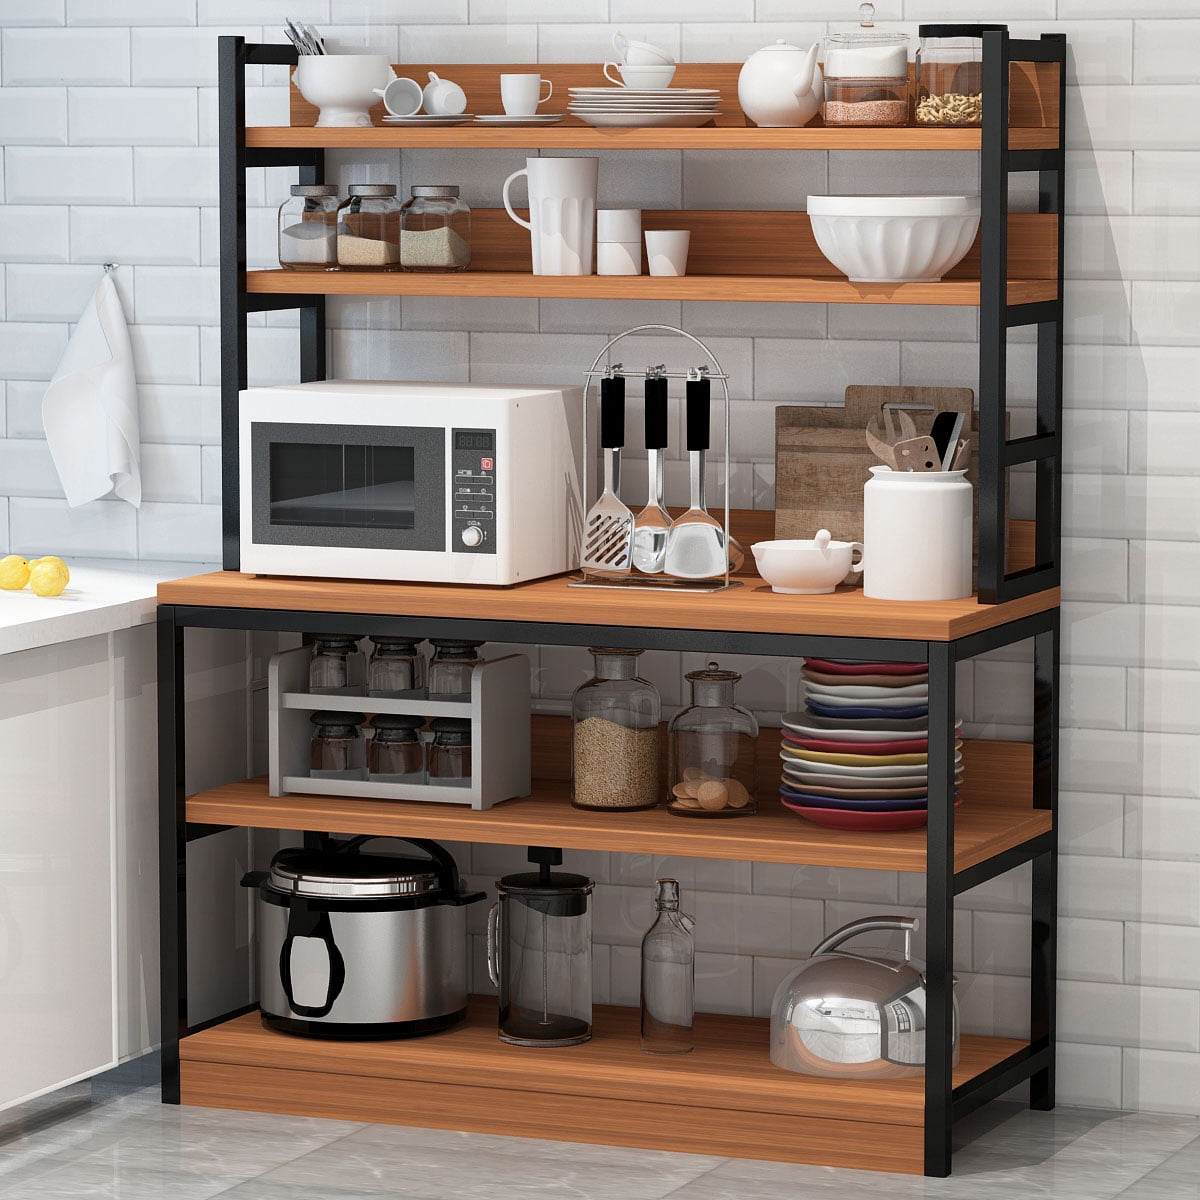 5 Tier Kitchen Bakers Storage Rack Rolling Microwave Oven Stand Shelf Black 